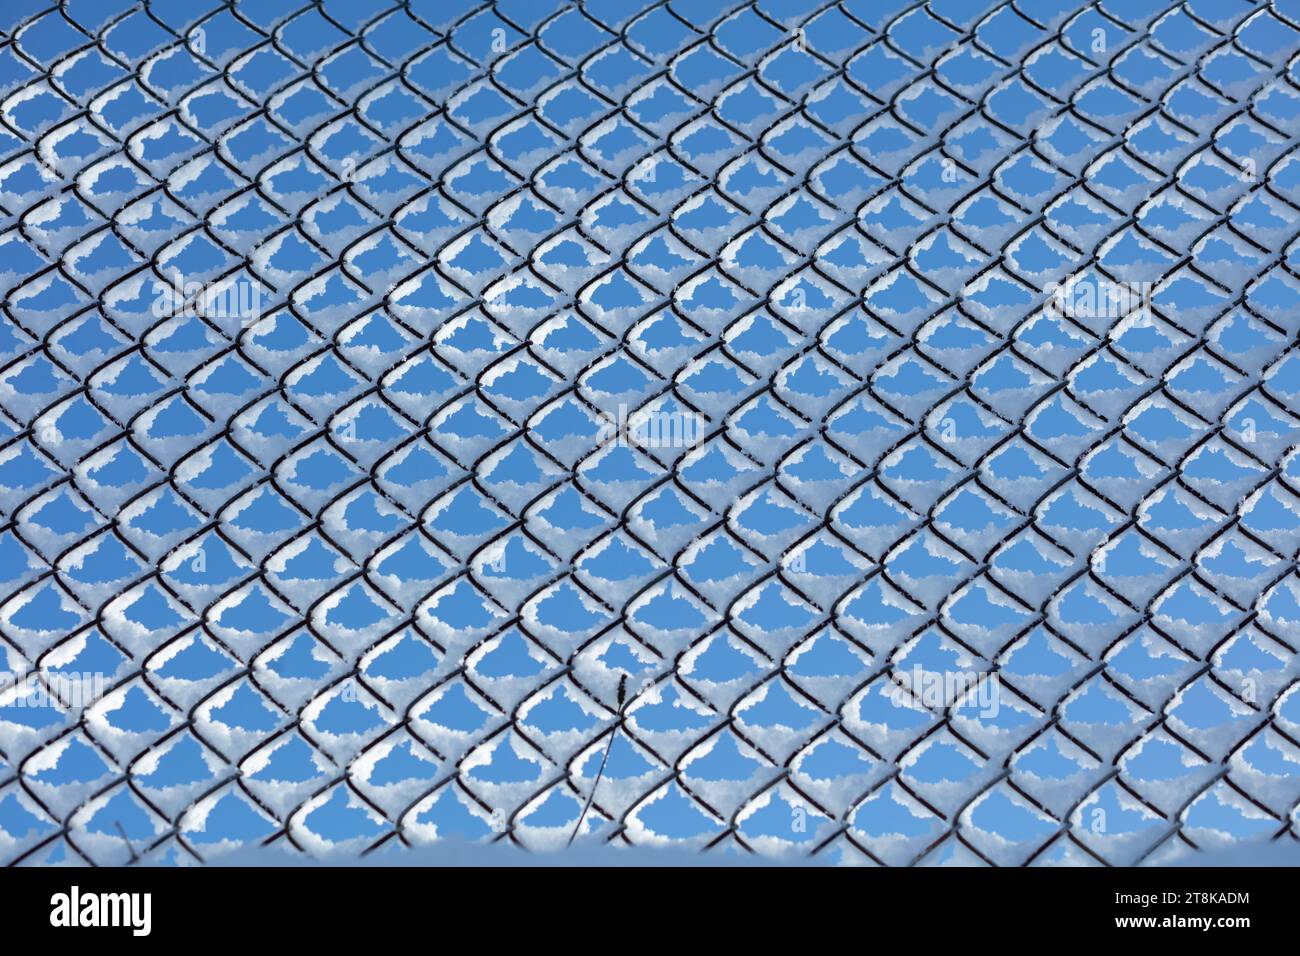 Snow on chain link fence against blue sky Stock Photo